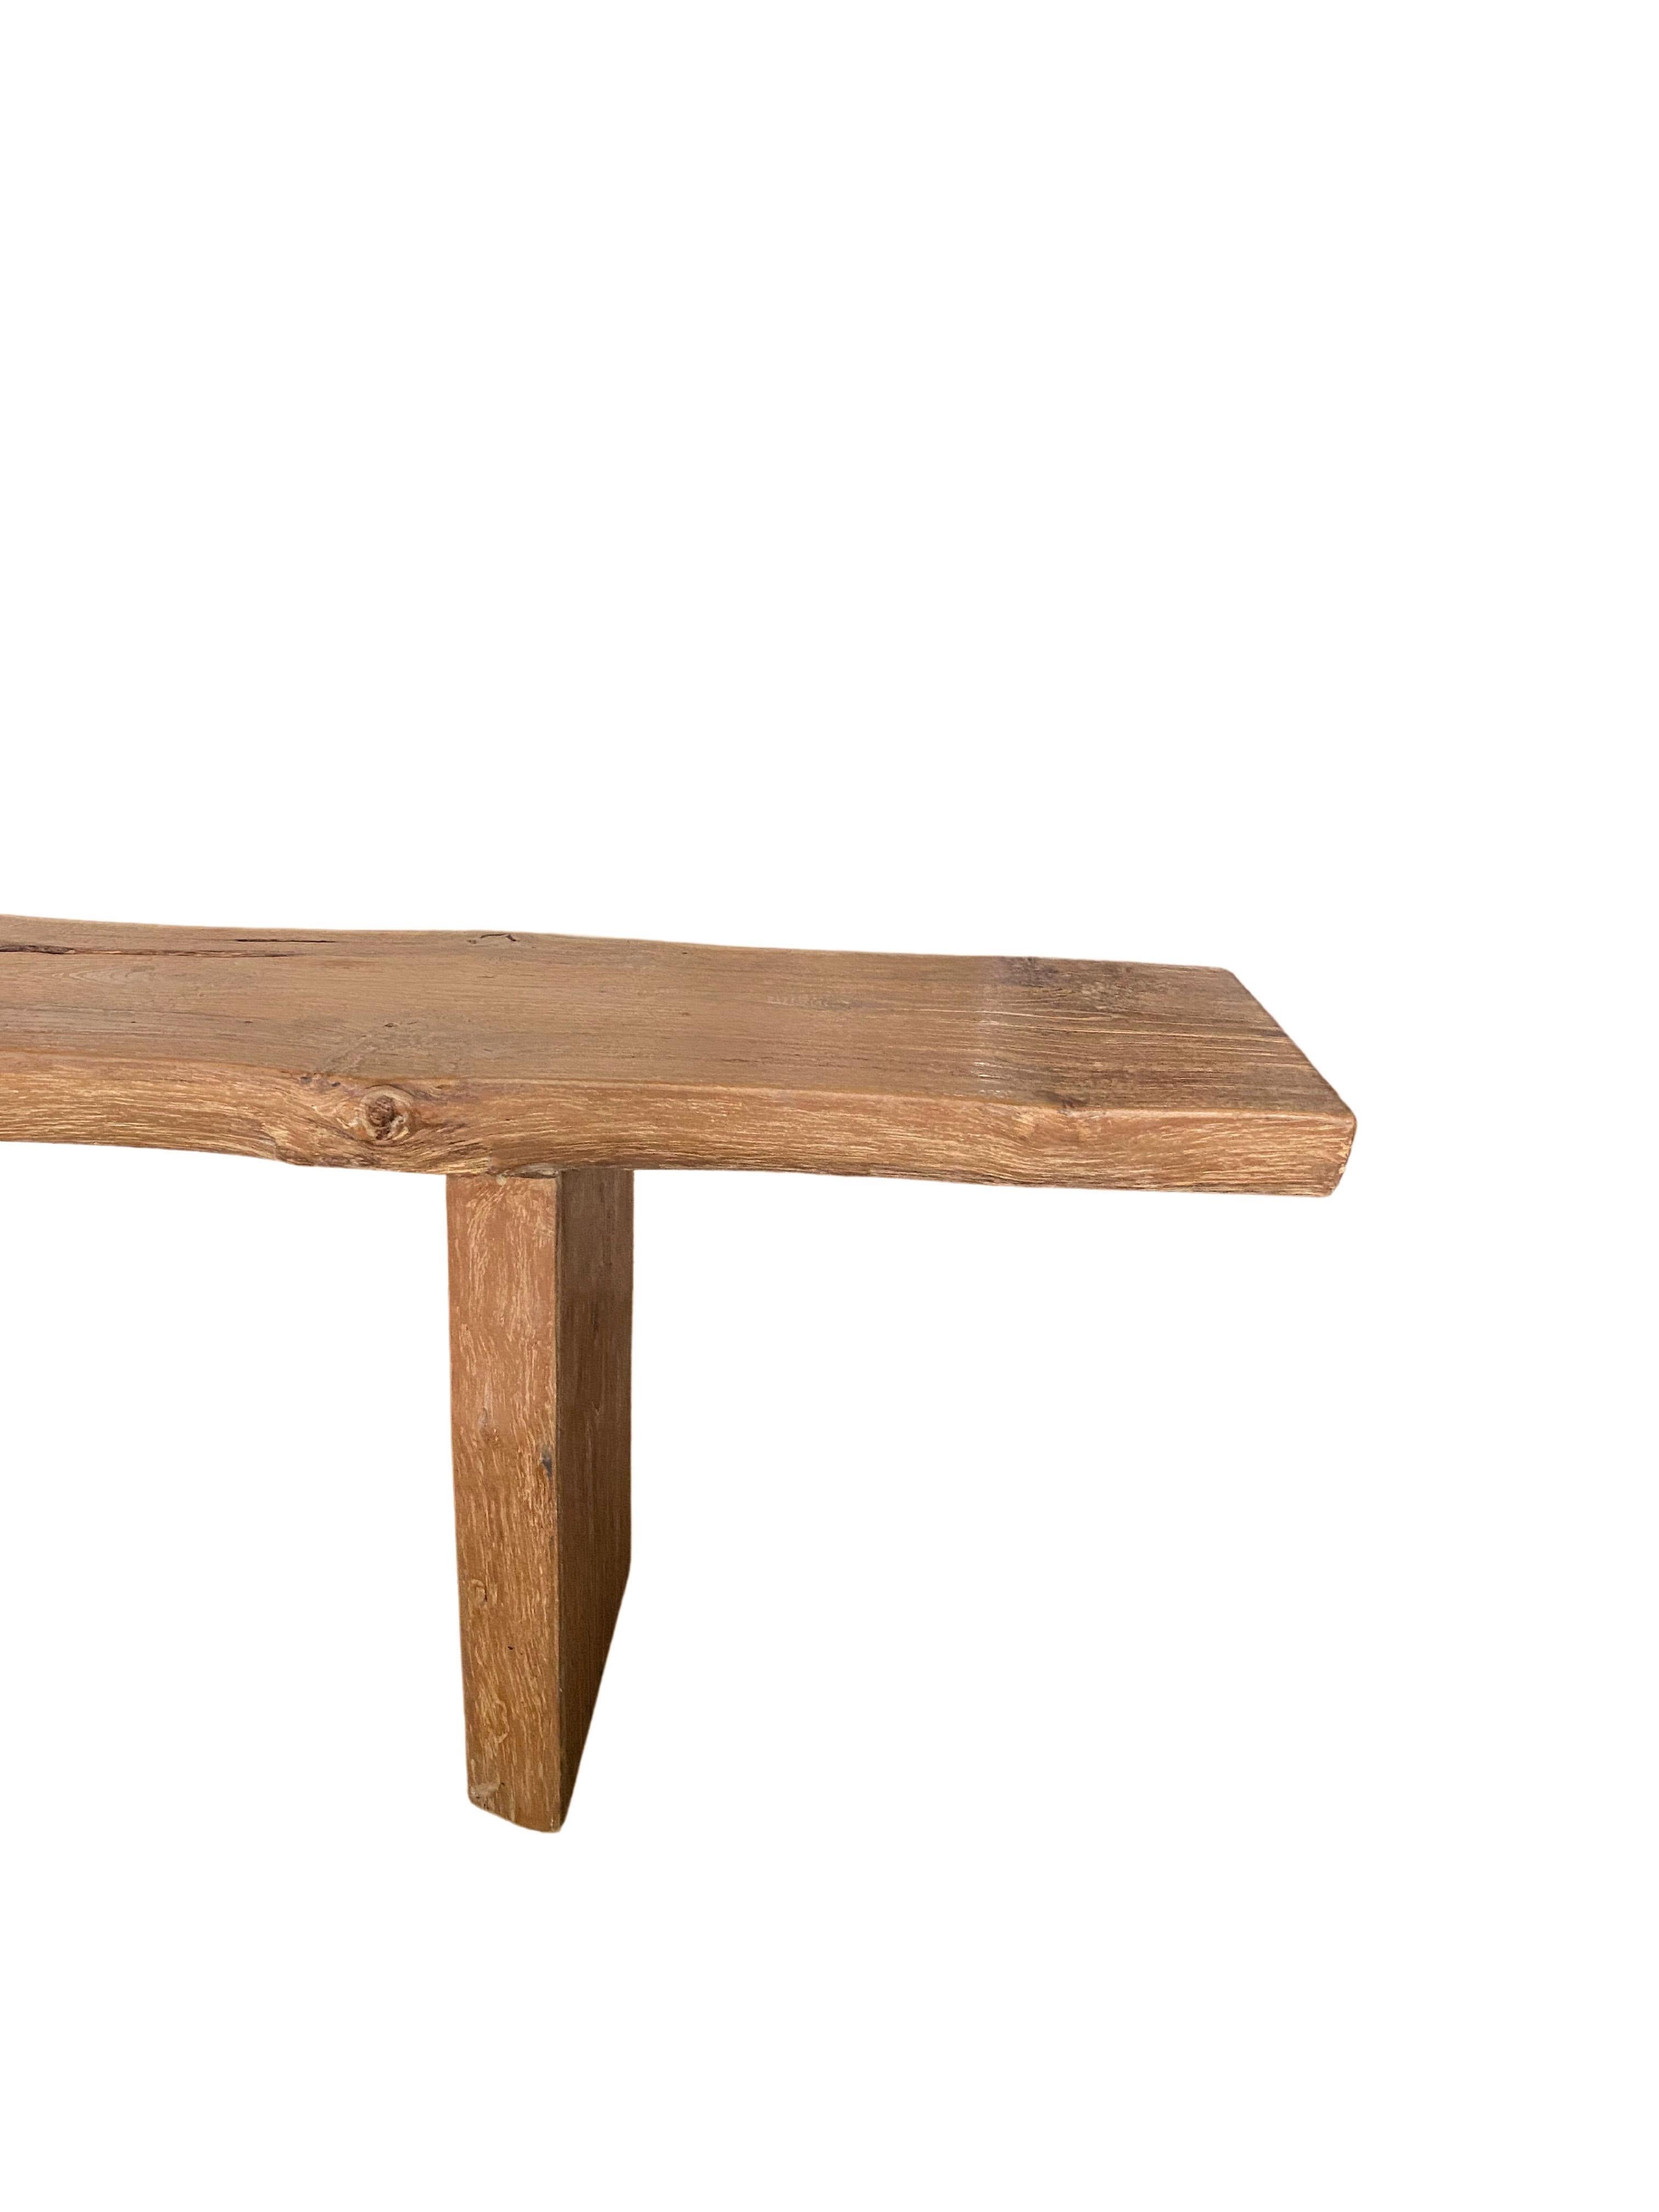 Hand-Carved Solid Teak Wood Long Bench Modern Organic For Sale